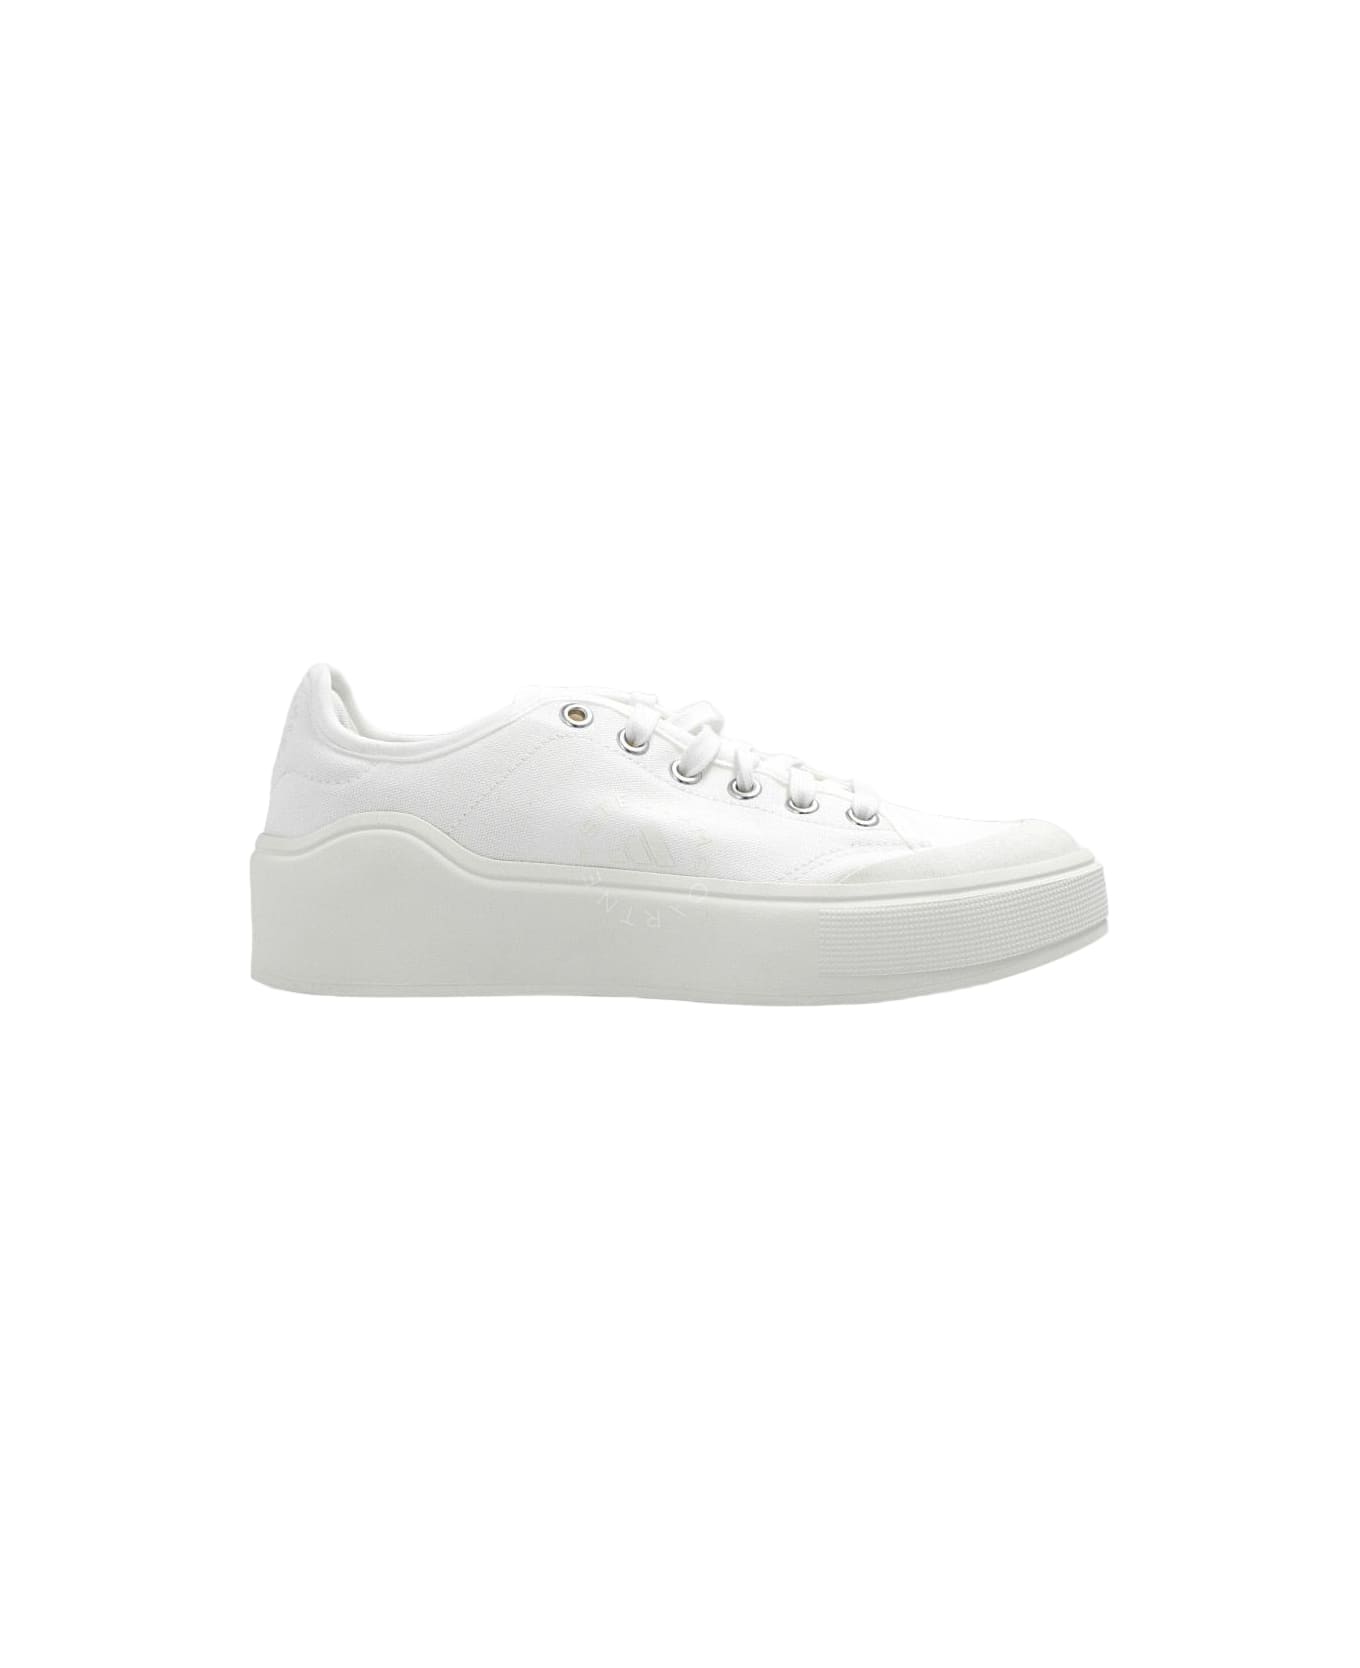 Adidas by Stella McCartney 'court' Sneakers